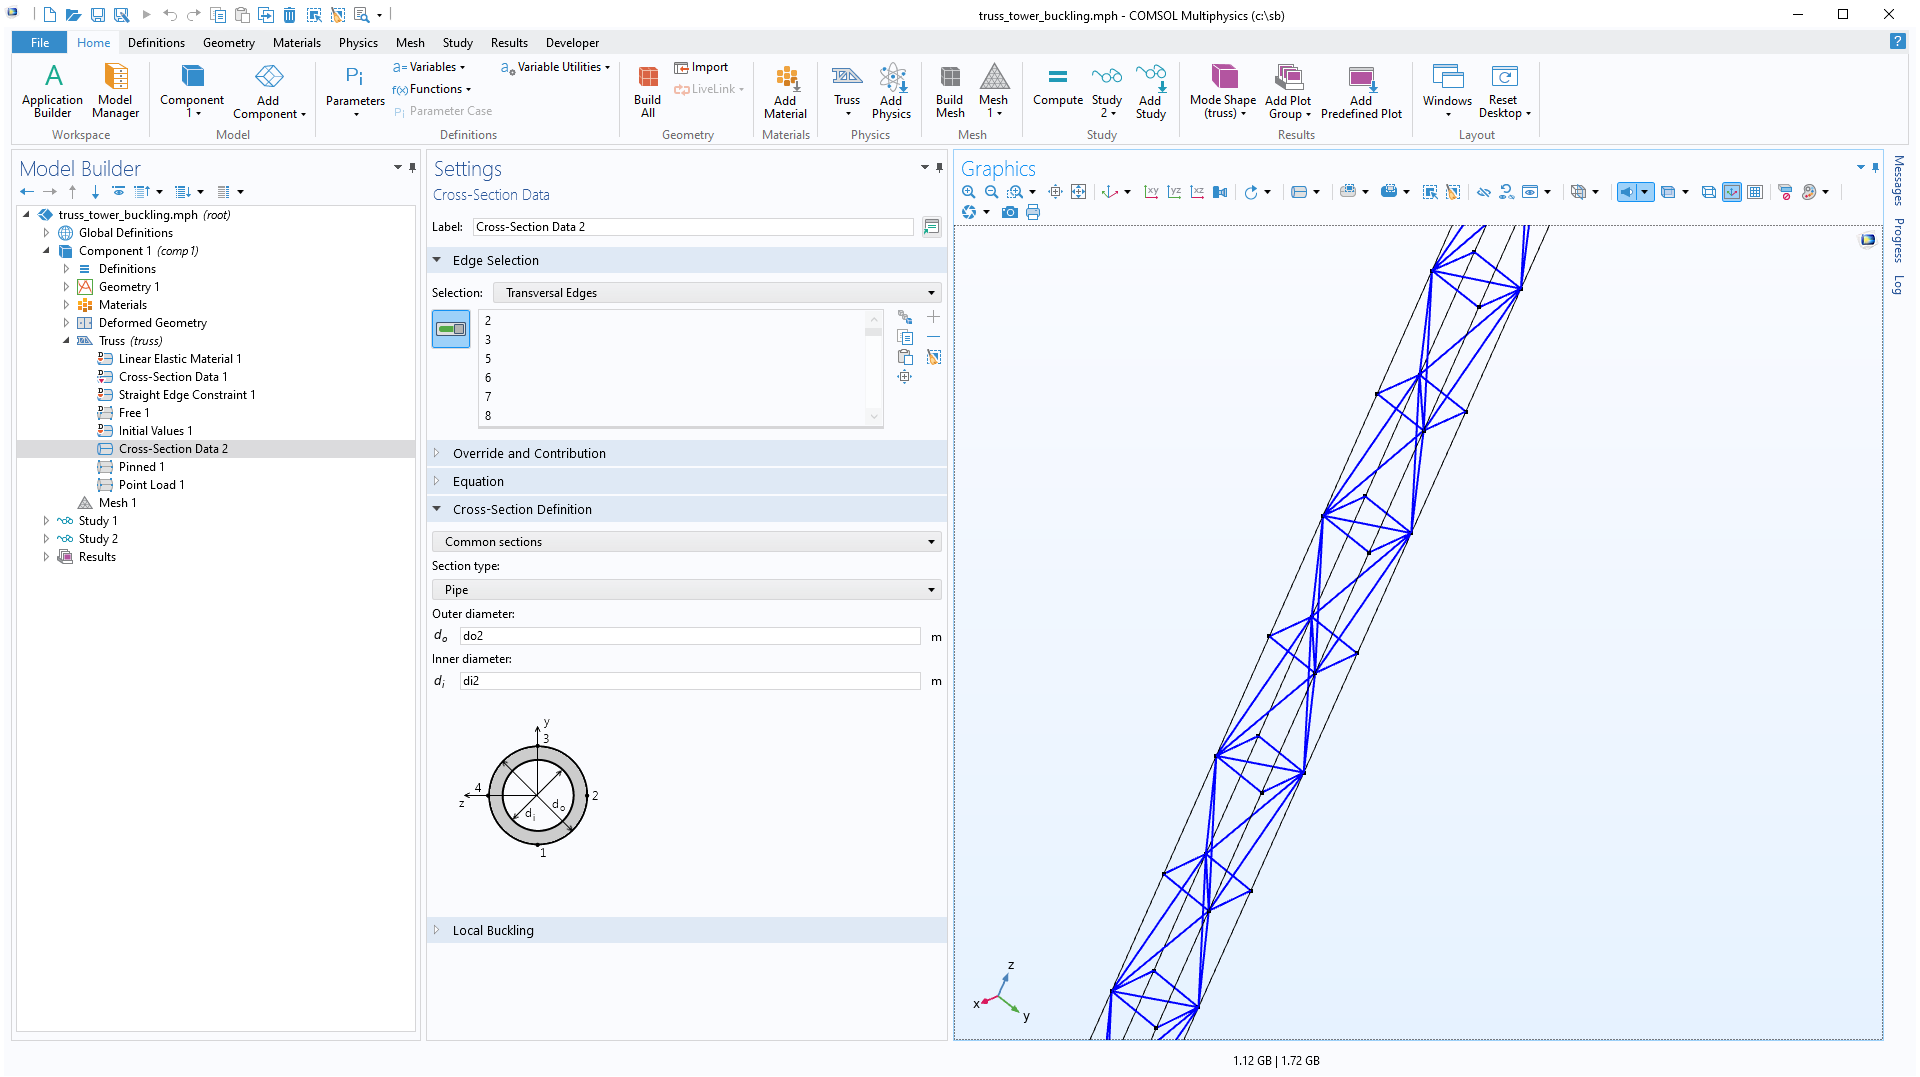 The COMSOL Multiphysics UI showing the Model Builder with the Cross-Section Data node highlighted, the corresponding Settings window, and a truss tower model in the Graphics window.